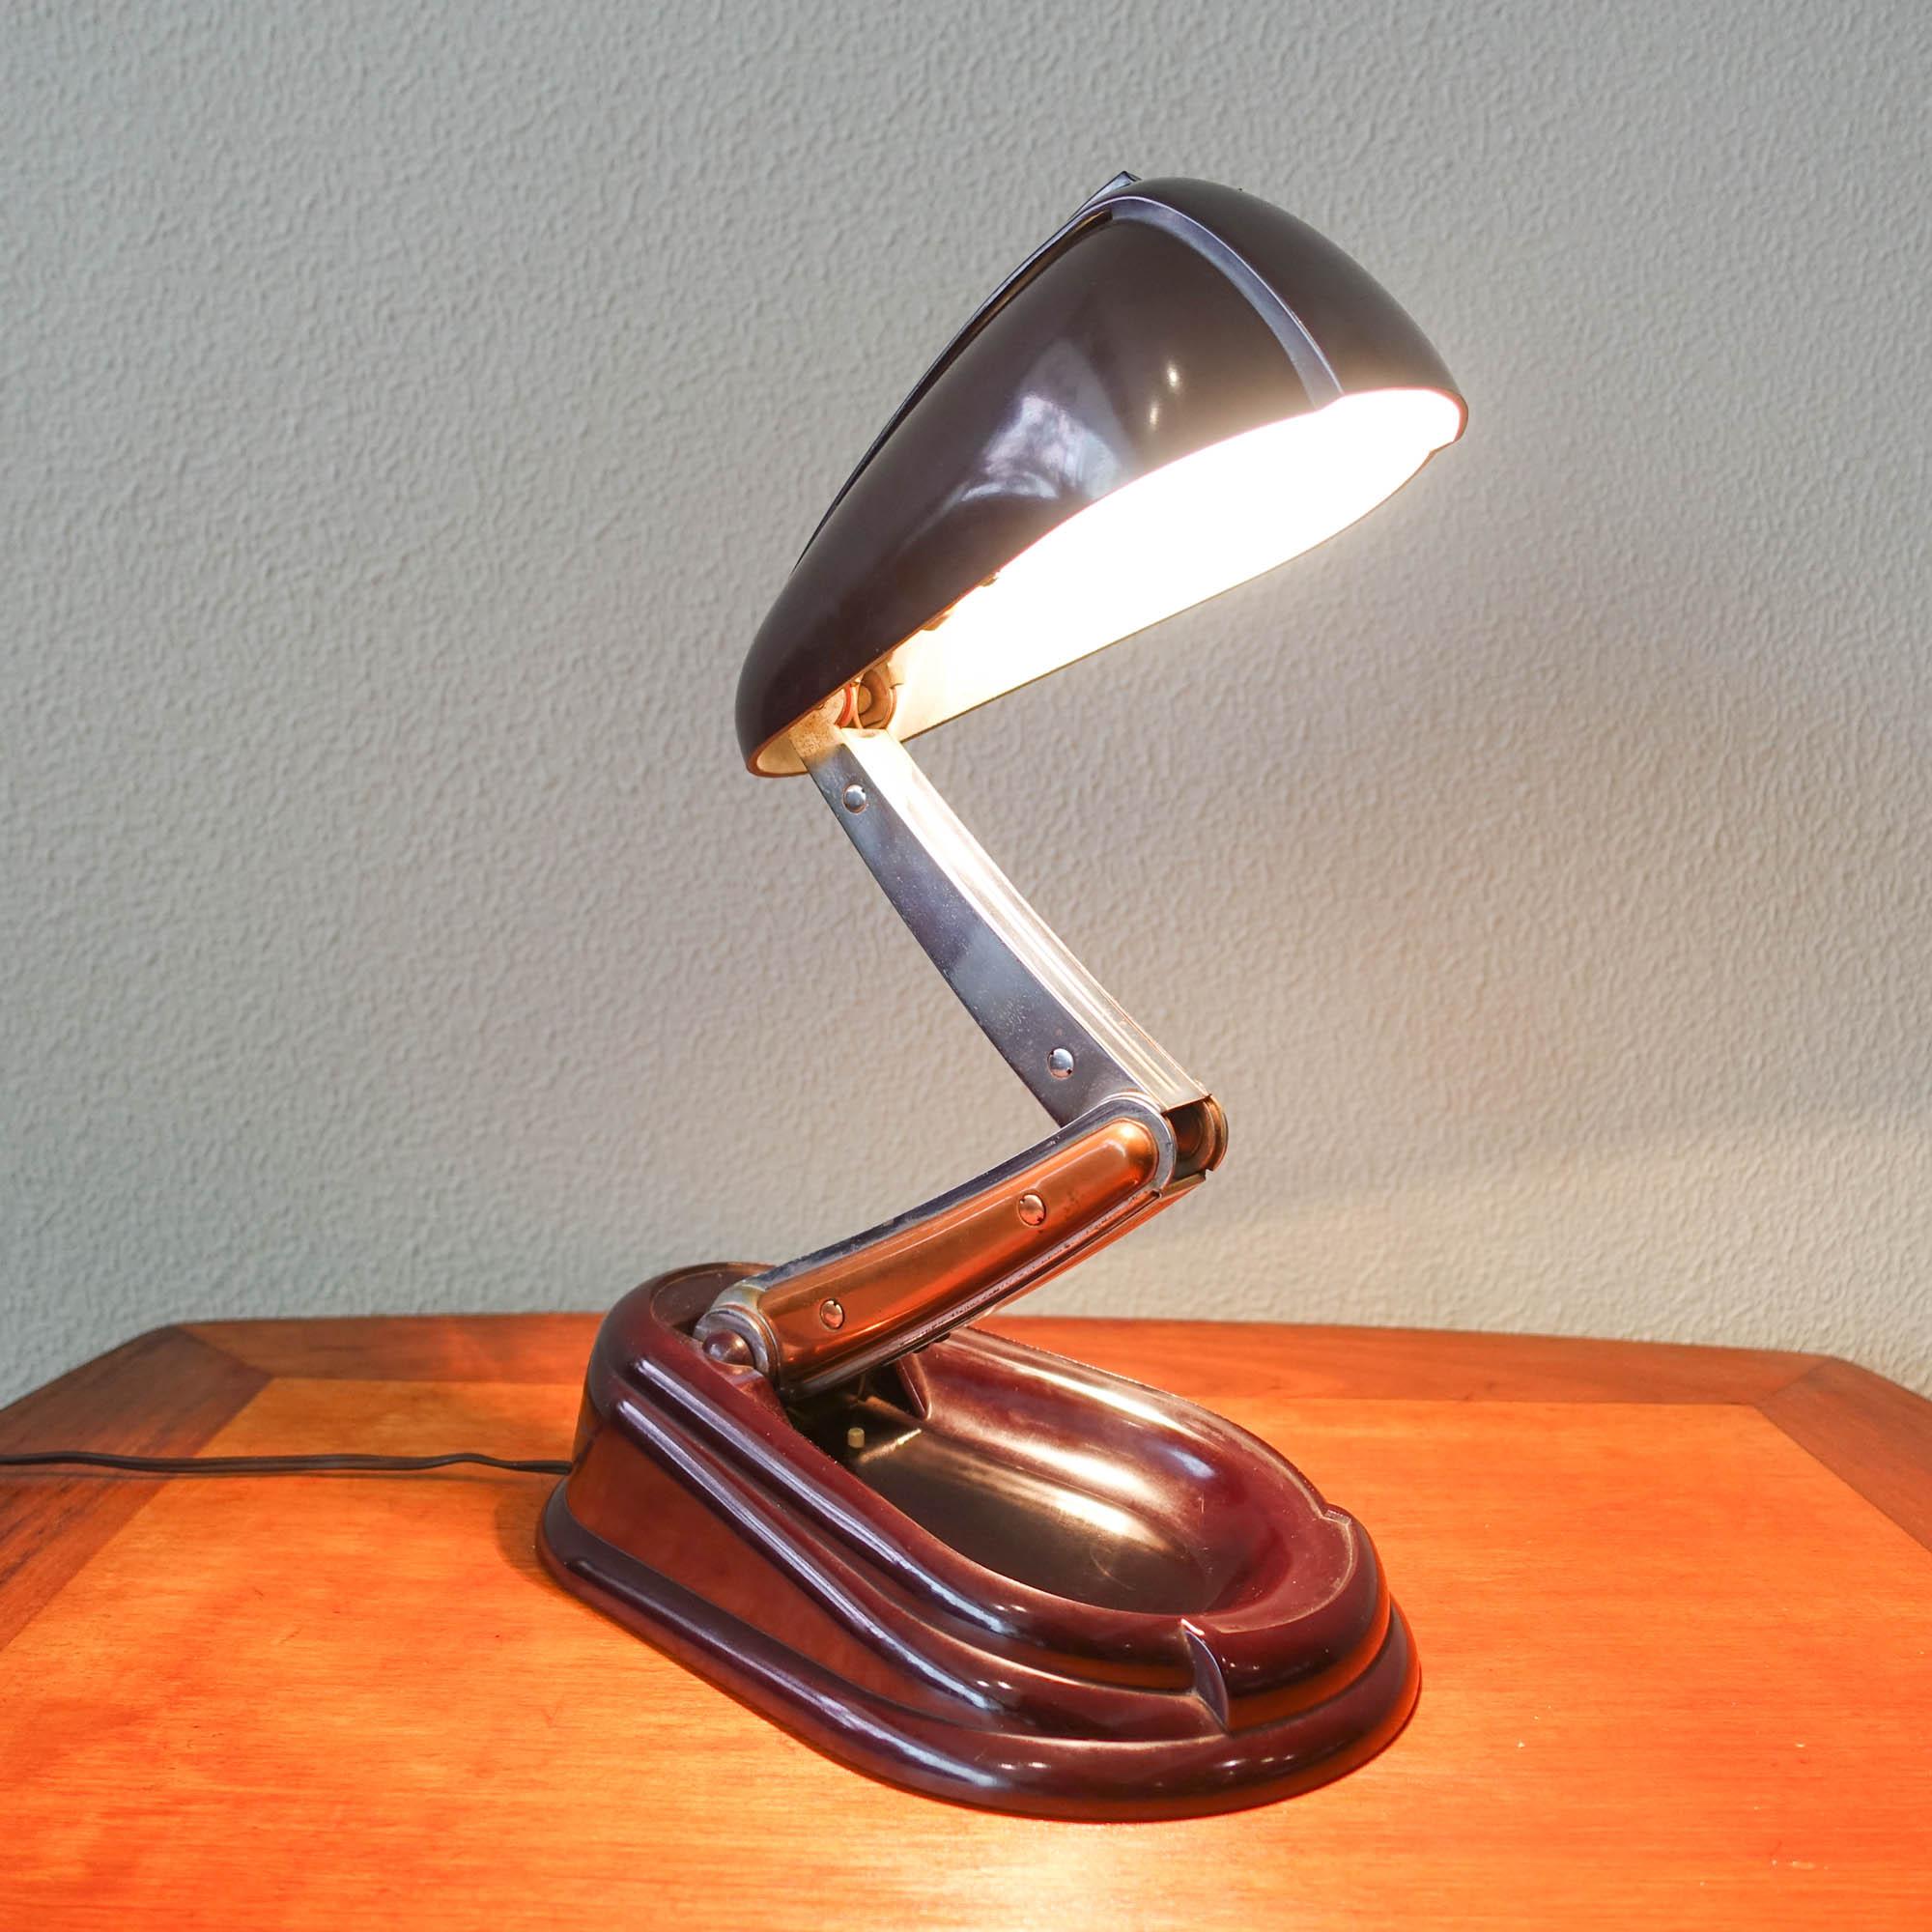 French Model Bolide Table Lamp by Jumo Brevete for Jumo, 1940s